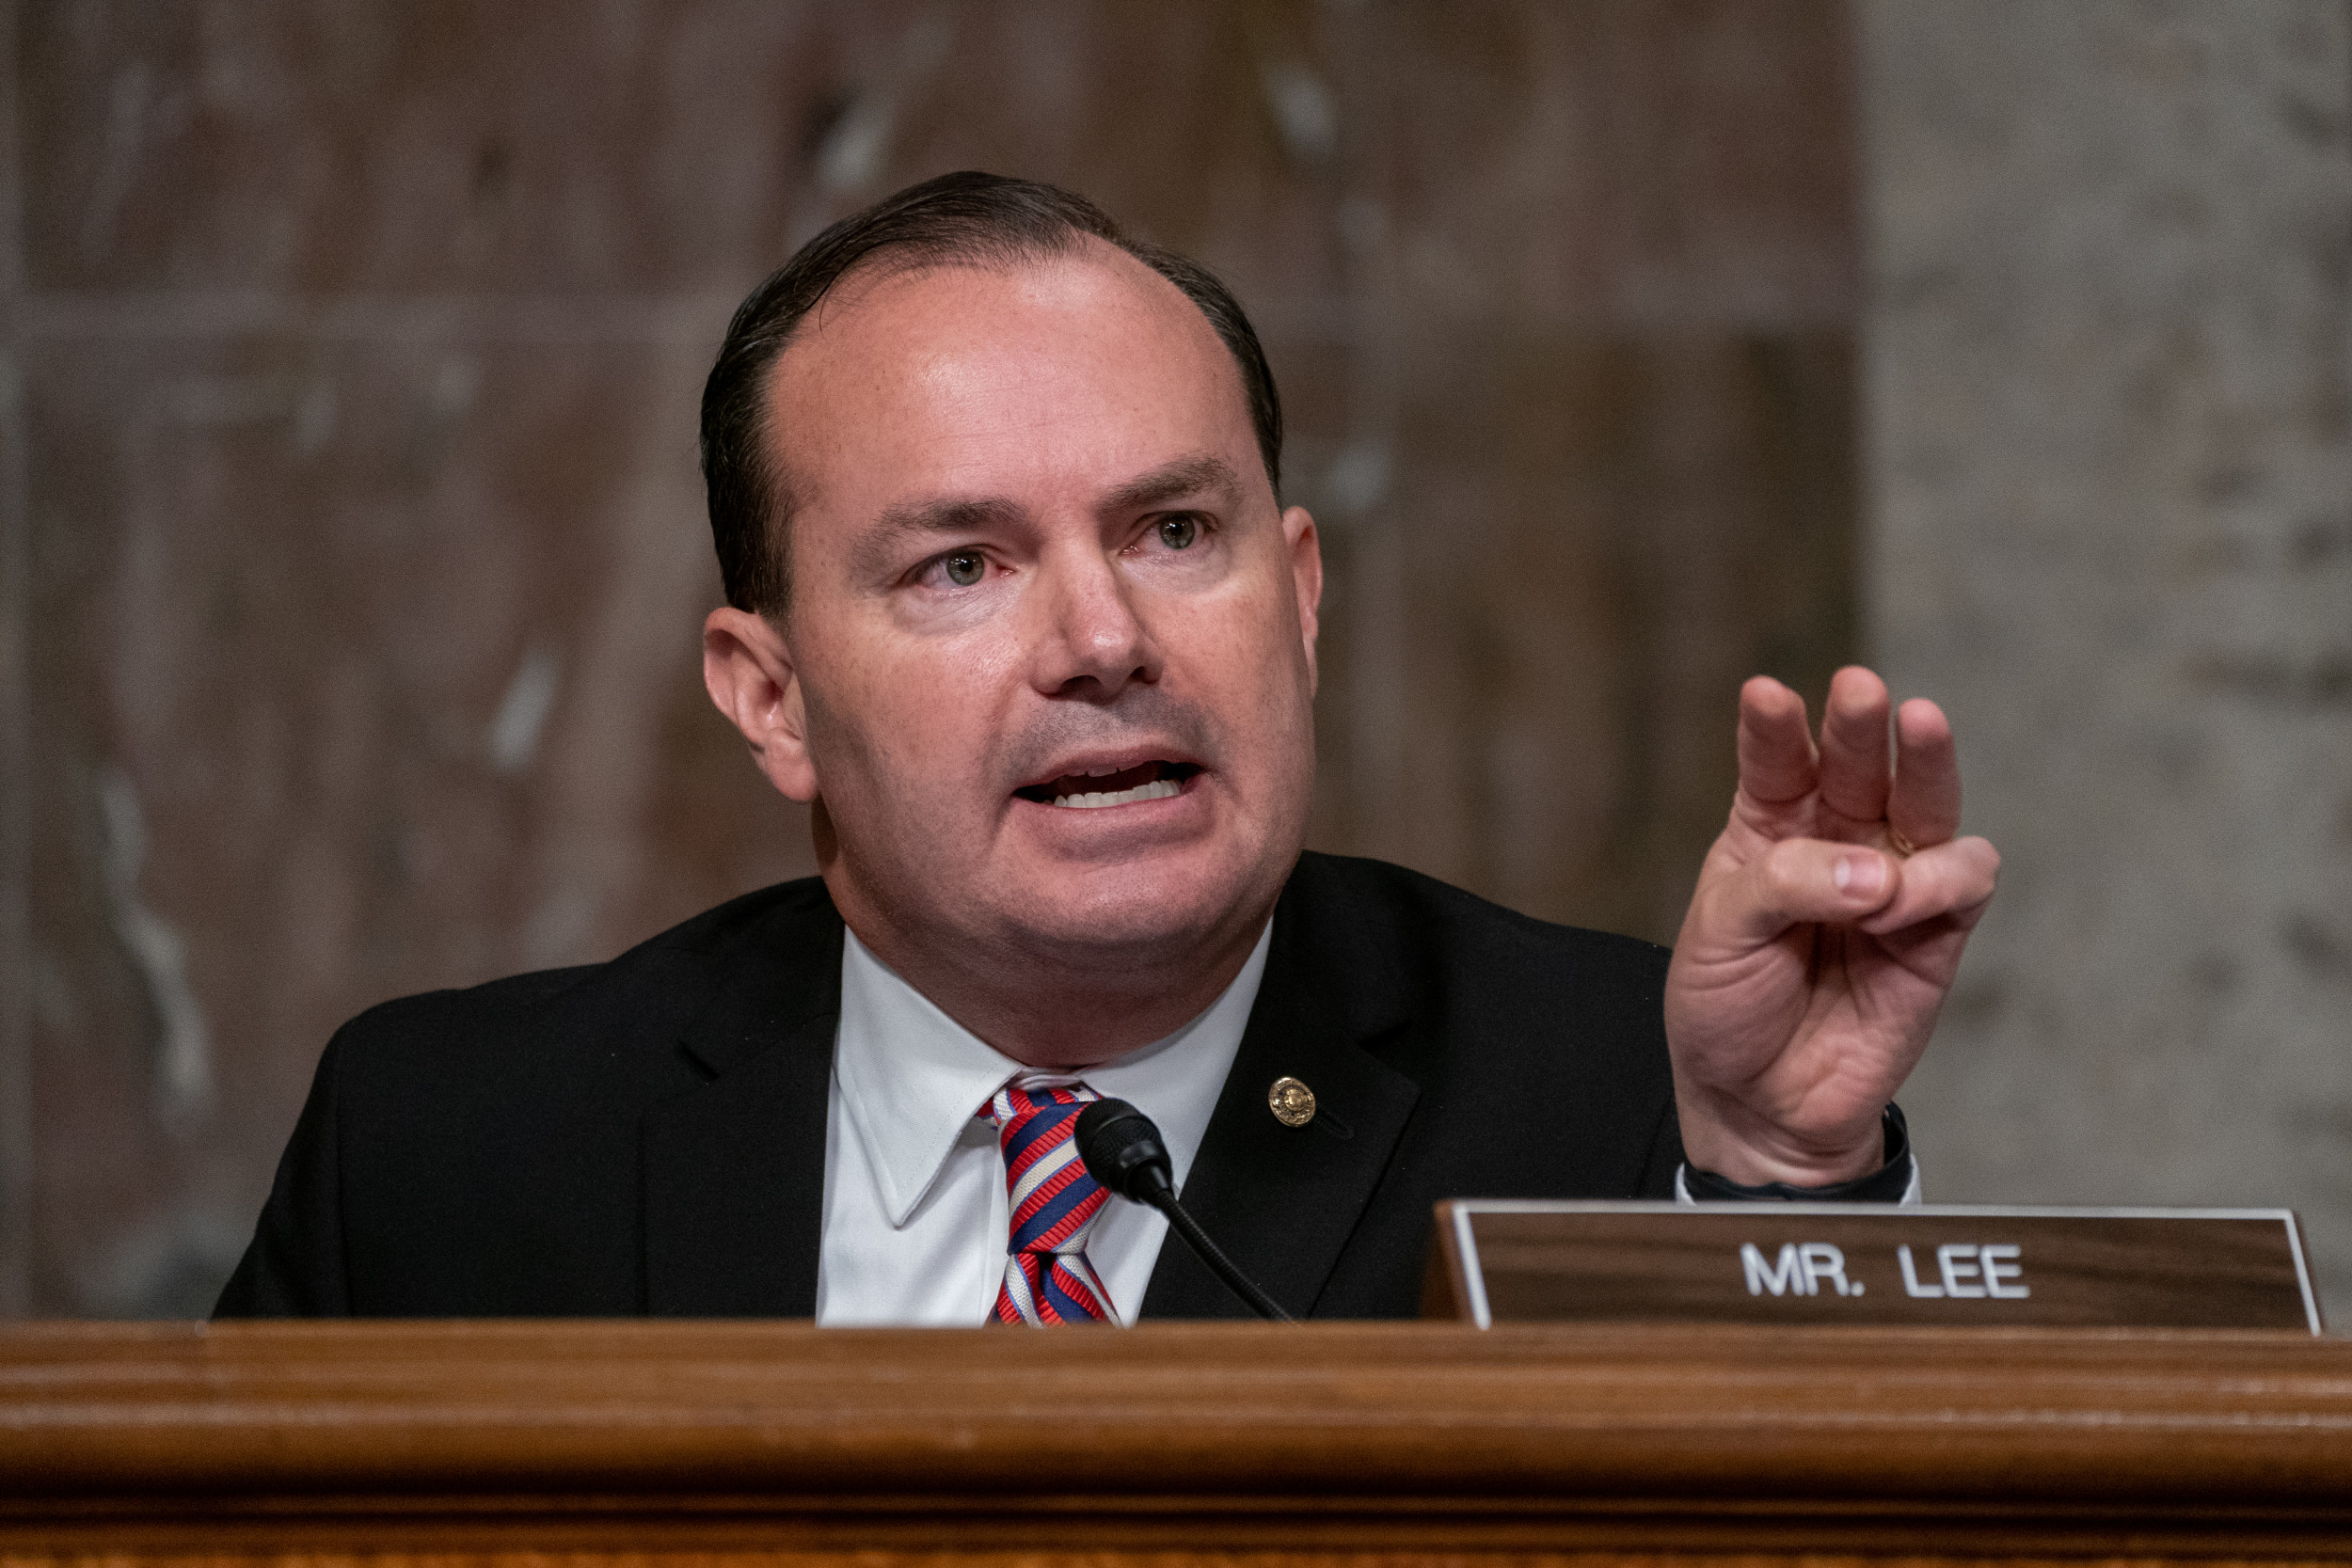 Video of Mike Lee Vowing to Gut Social Security Resurfaces